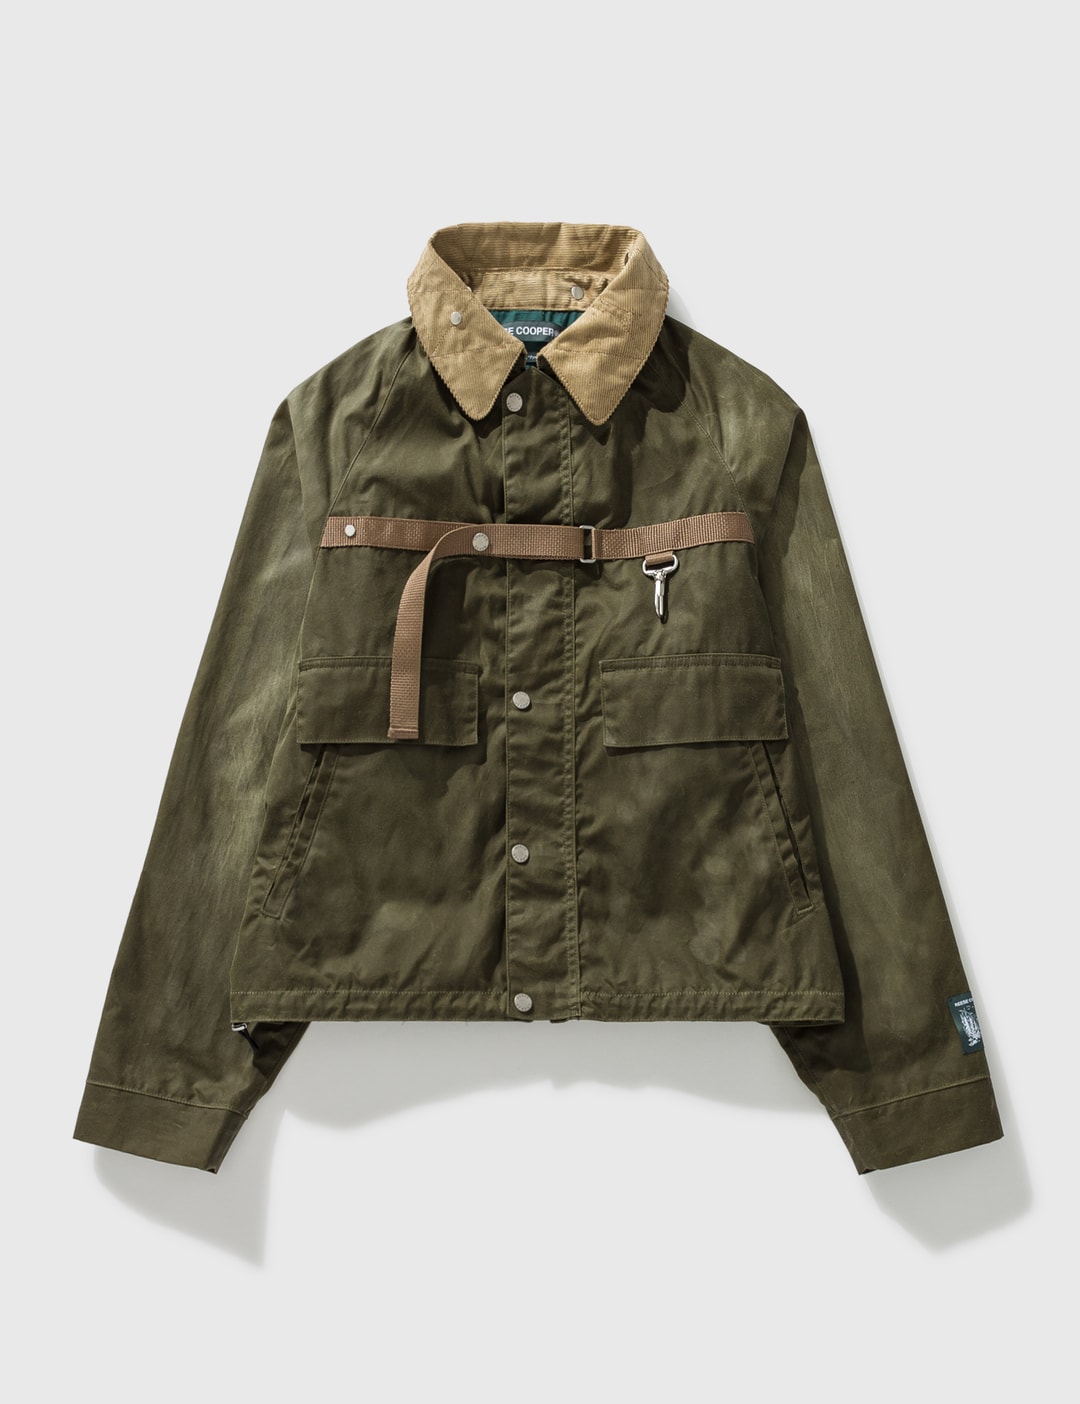 Reese Cooper® - Hand-Dyed Printed Cotton Overshirt - Green Reese Cooper